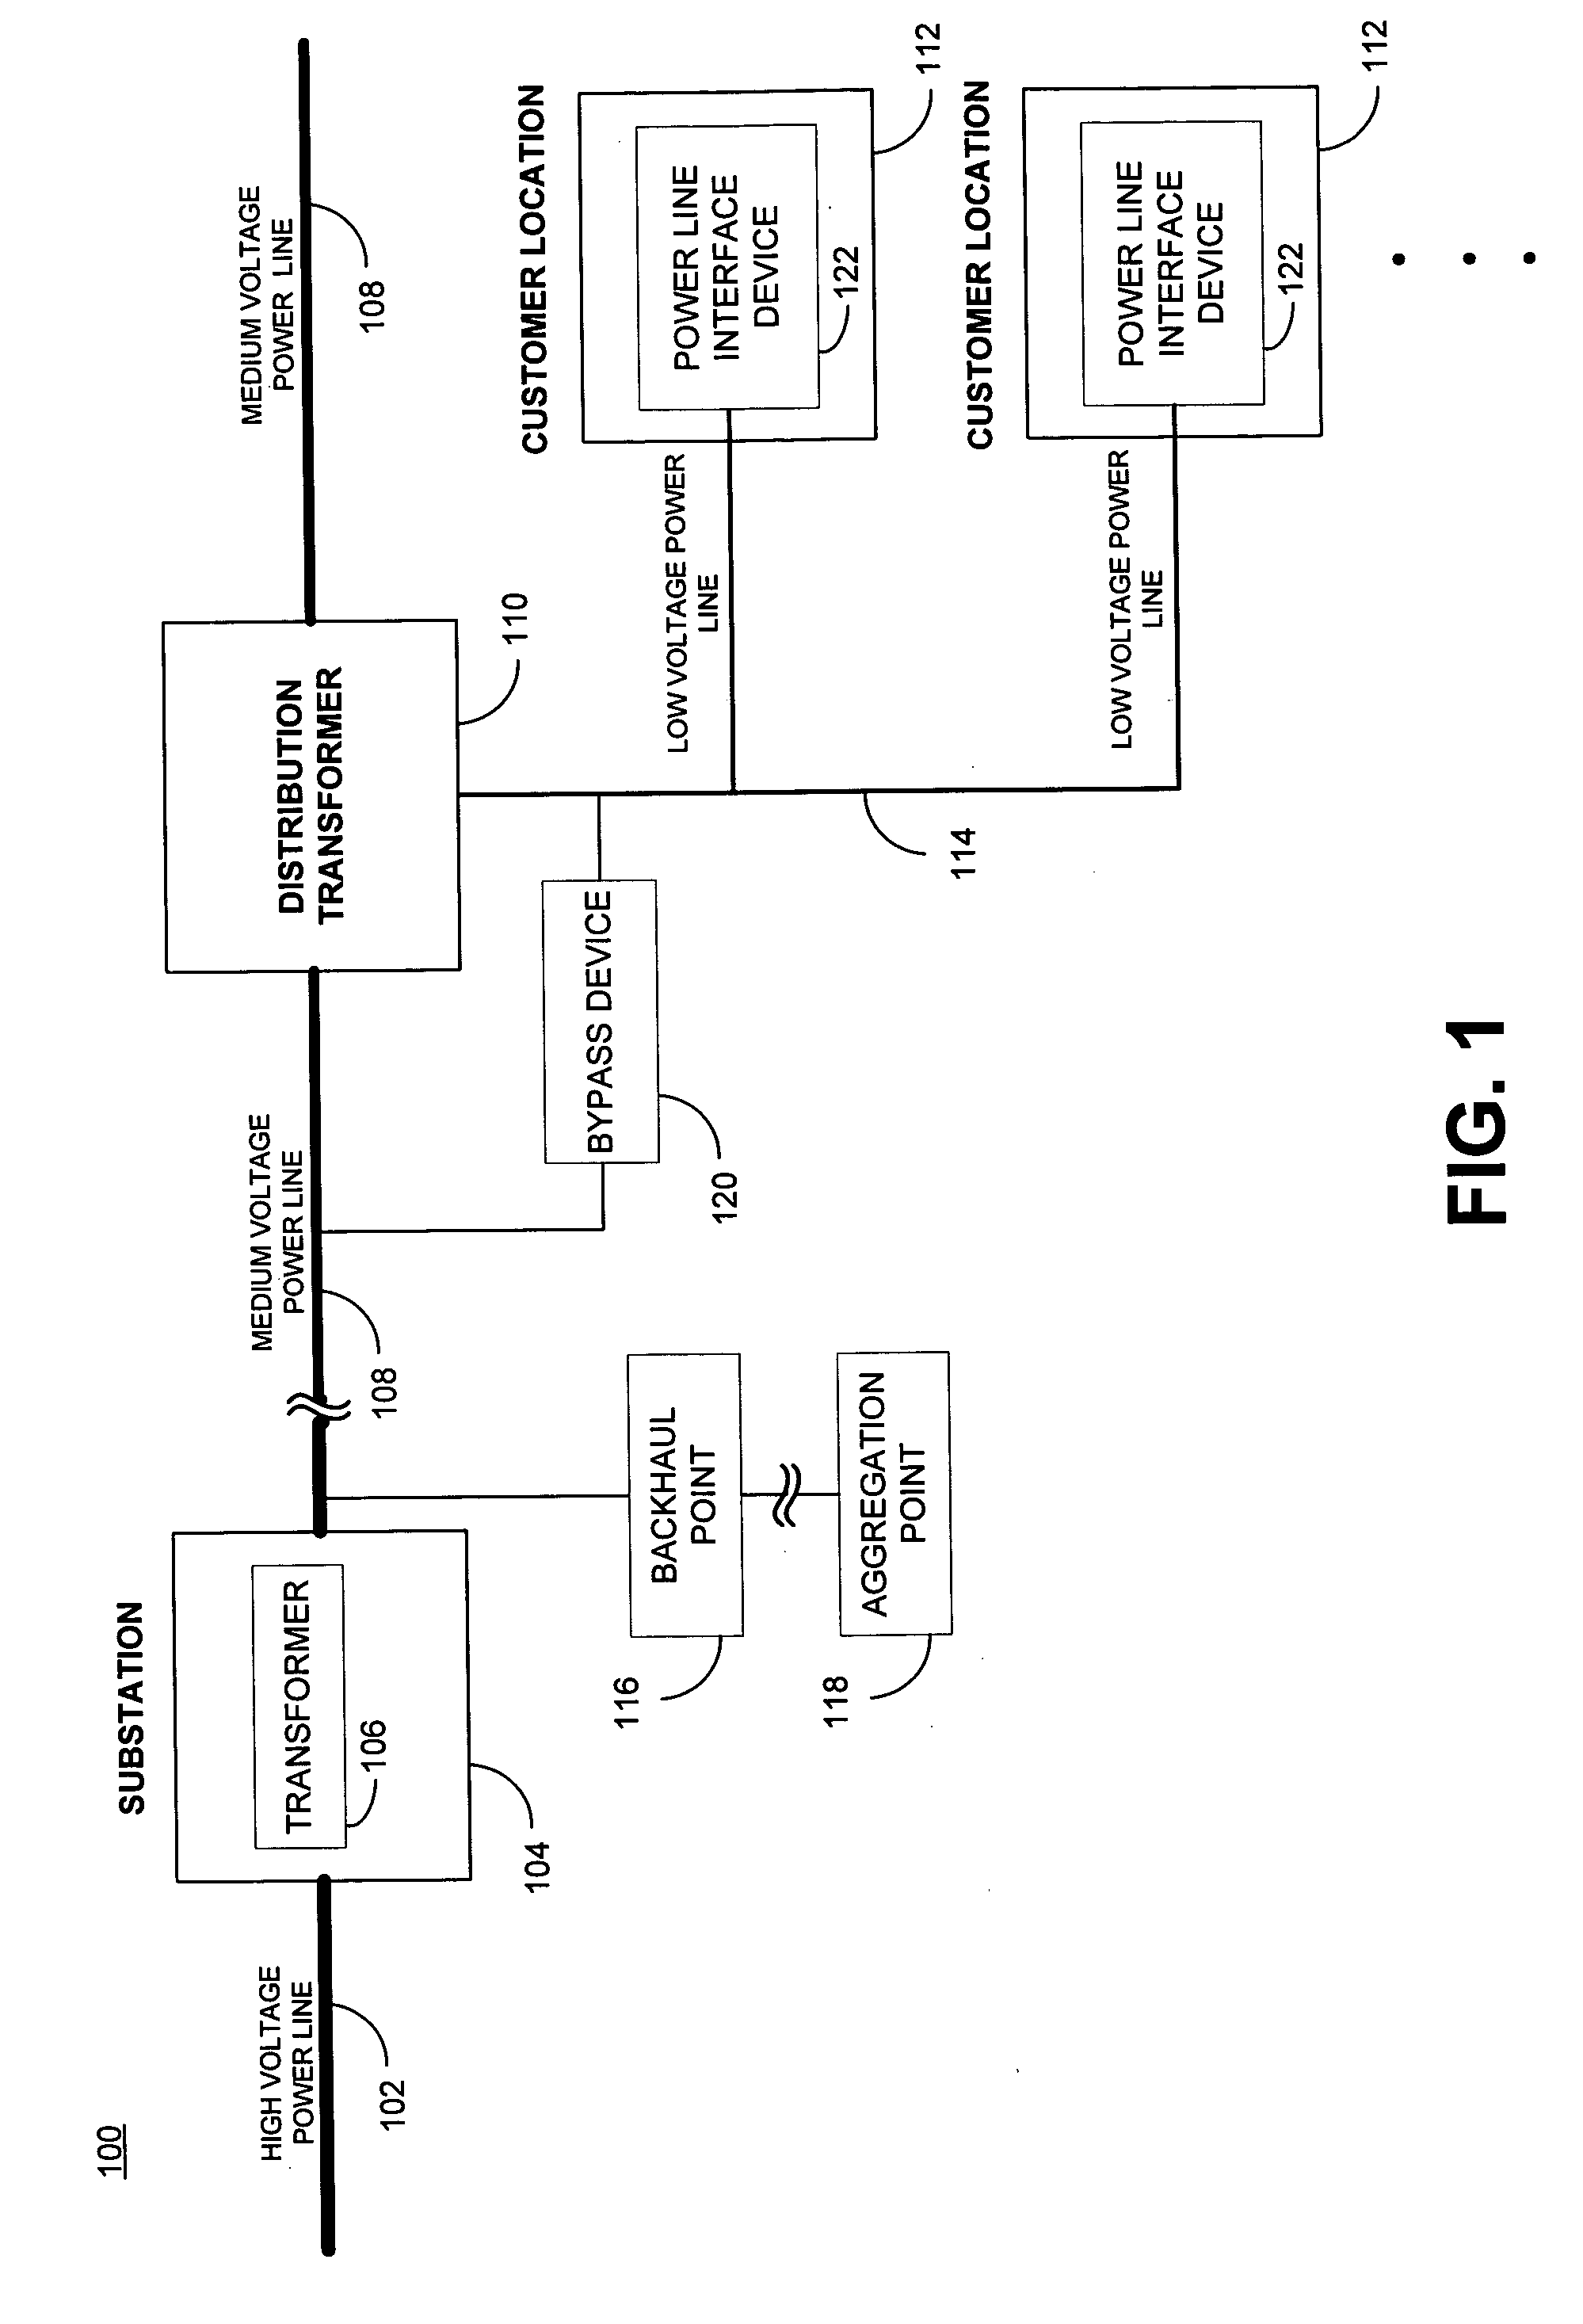 System and method for determining service availability and soliciting customers